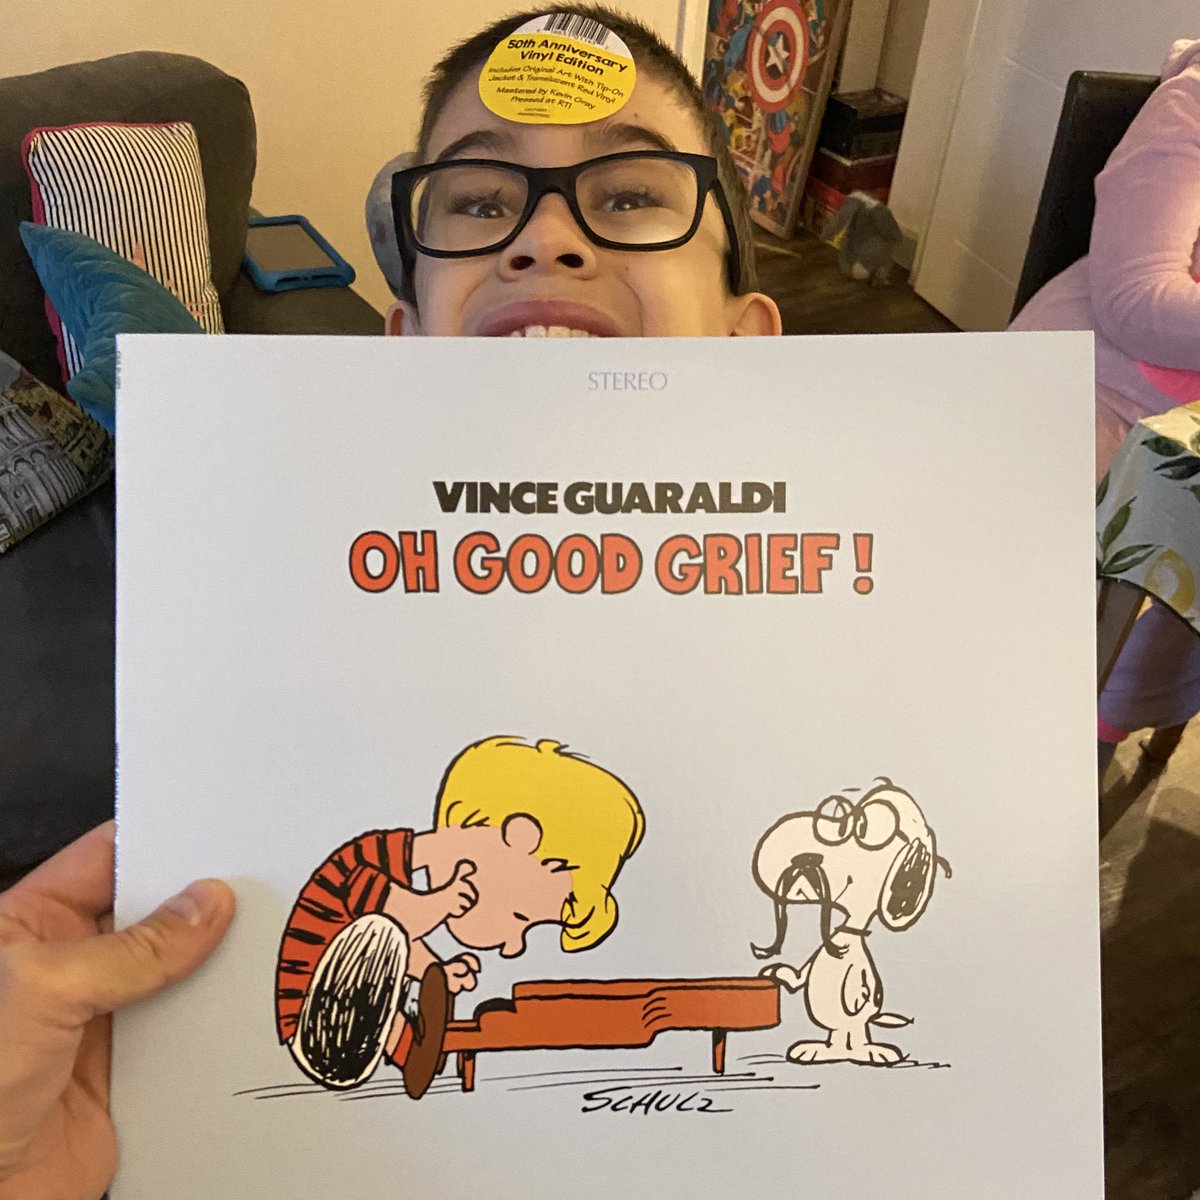 Received a #birthday pressie today which my son chose! #VinceGuaraldi - Oh, Good Grief! from 1968. This is the #50thanniversary edition on #Vinyl

#Peanuts #CharlieBrown #Snoopy #vinylcollection #vinylcommunity #vinylrecords #vinylcollector #vinyljunkie #vinyladdict